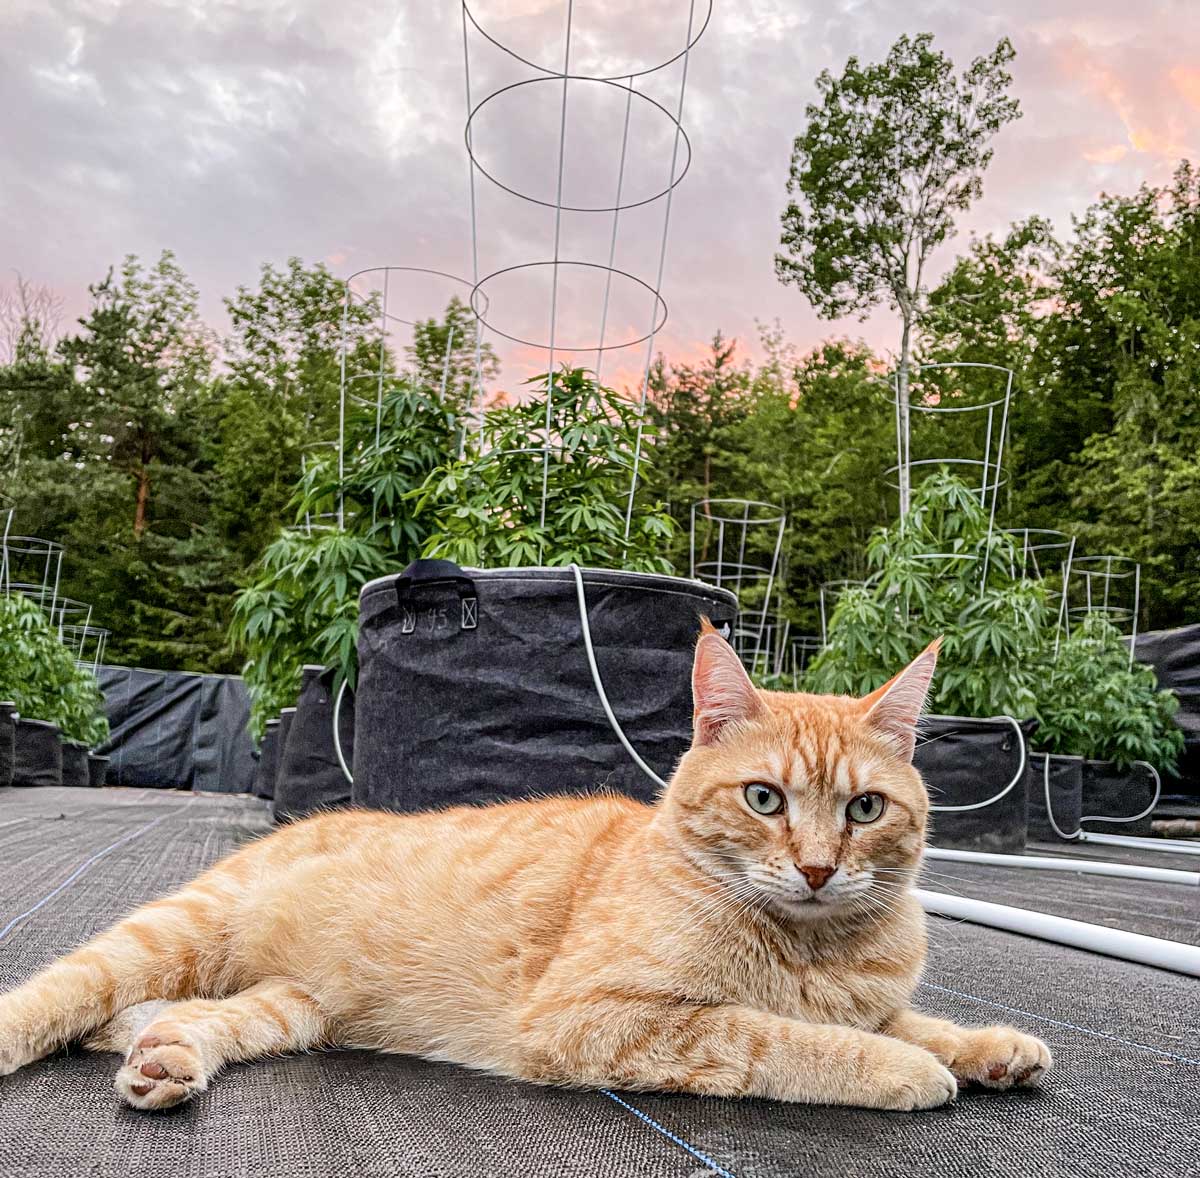 JinG the cat (golden colored cat) lounges in front of a recently planted seedling in the hemp field.